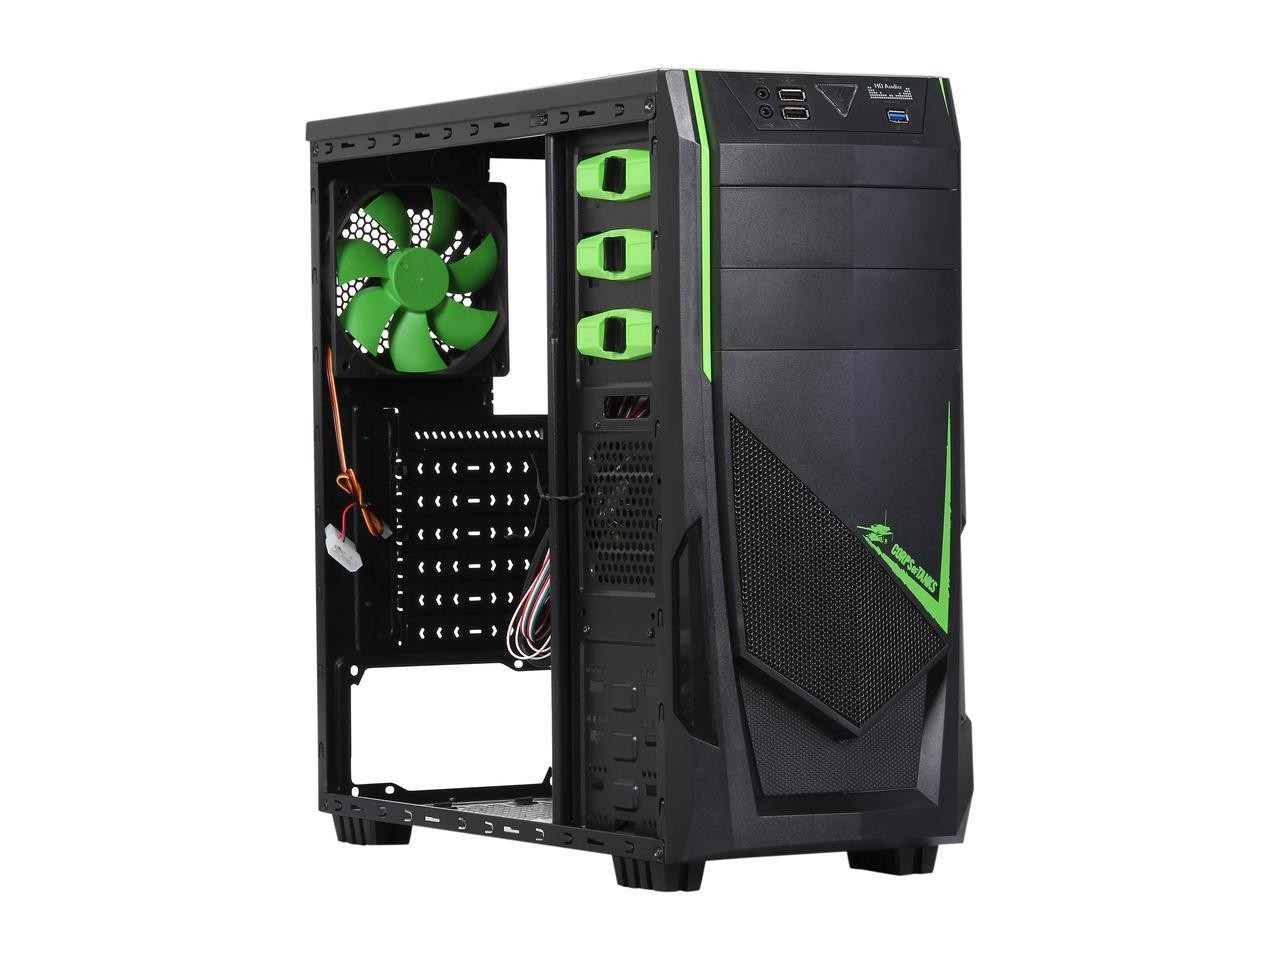 DIYPC Ranger-R8-G Black/Green USB 3.0 ATX Mid Tower Gaming Computer Case with 3 